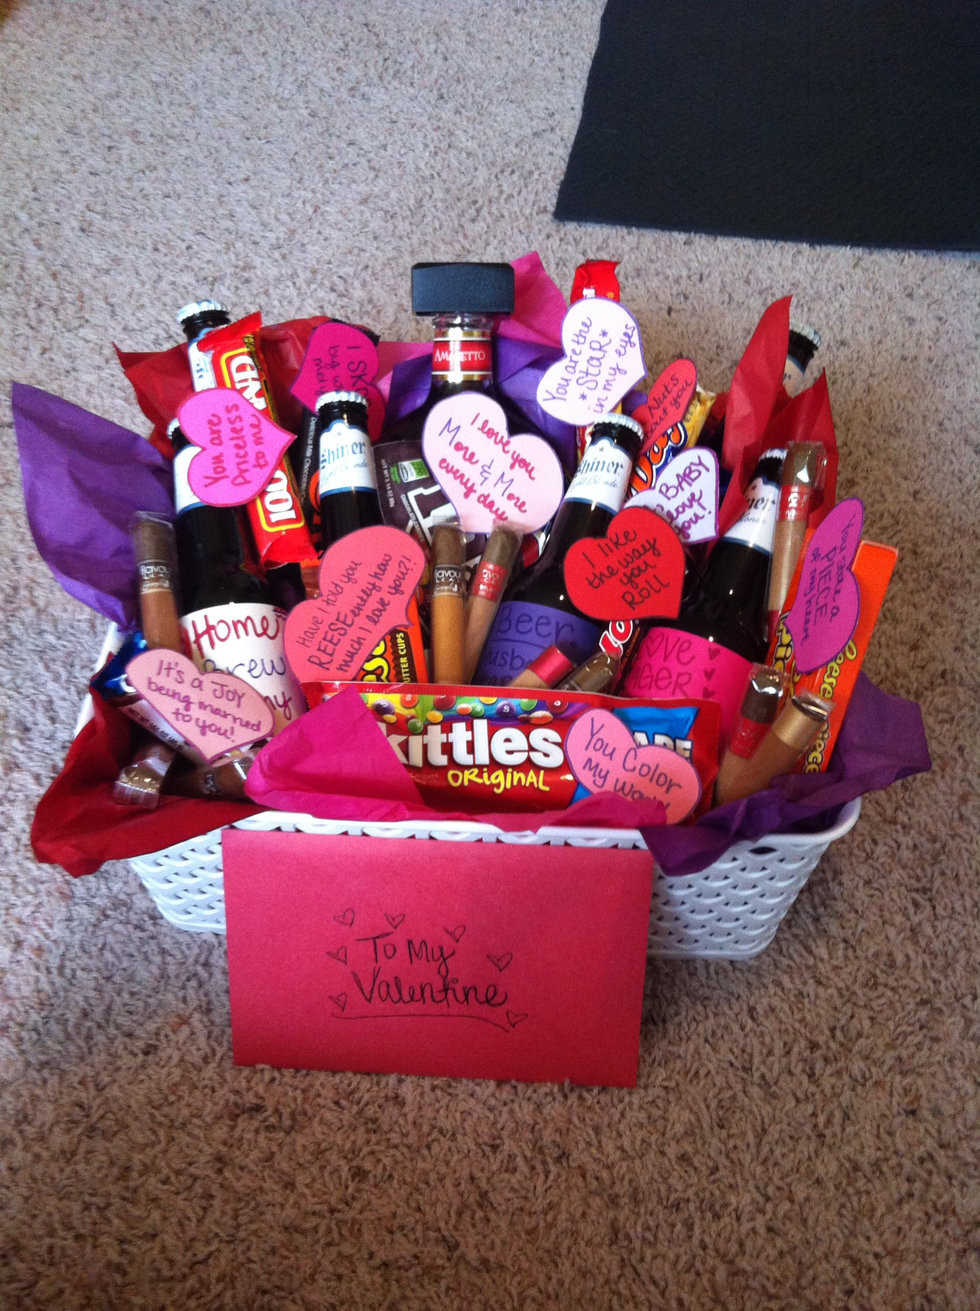 Cute Gift Basket Ideas For Boyfriend
 6 Things You Should Be Getting Your Boo Valentine s Day